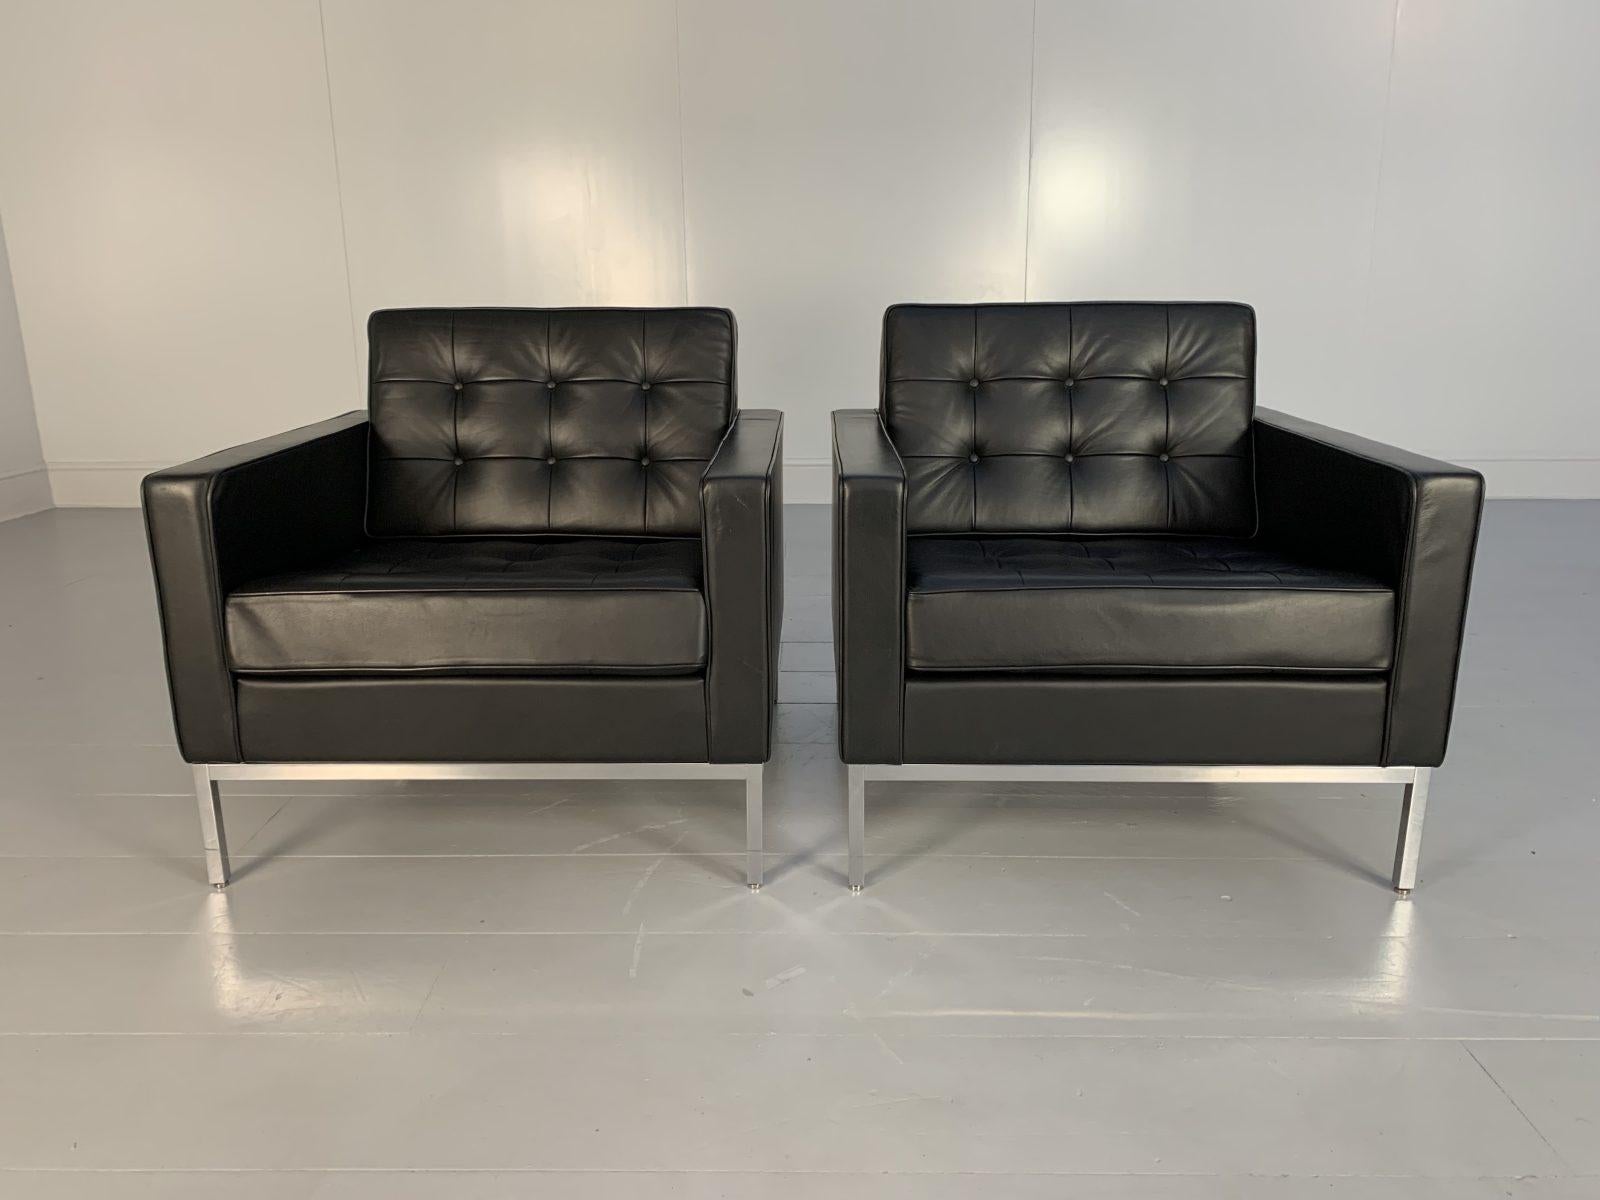 On offer on this occasion is a rare, original identical pair of “Florence Knoll” Lounge Chairs (one of 3 pairs i have at present, in case more than a pair/multiple-pairs are required) from the world renown furniture house of Knoll Studio, dressed in